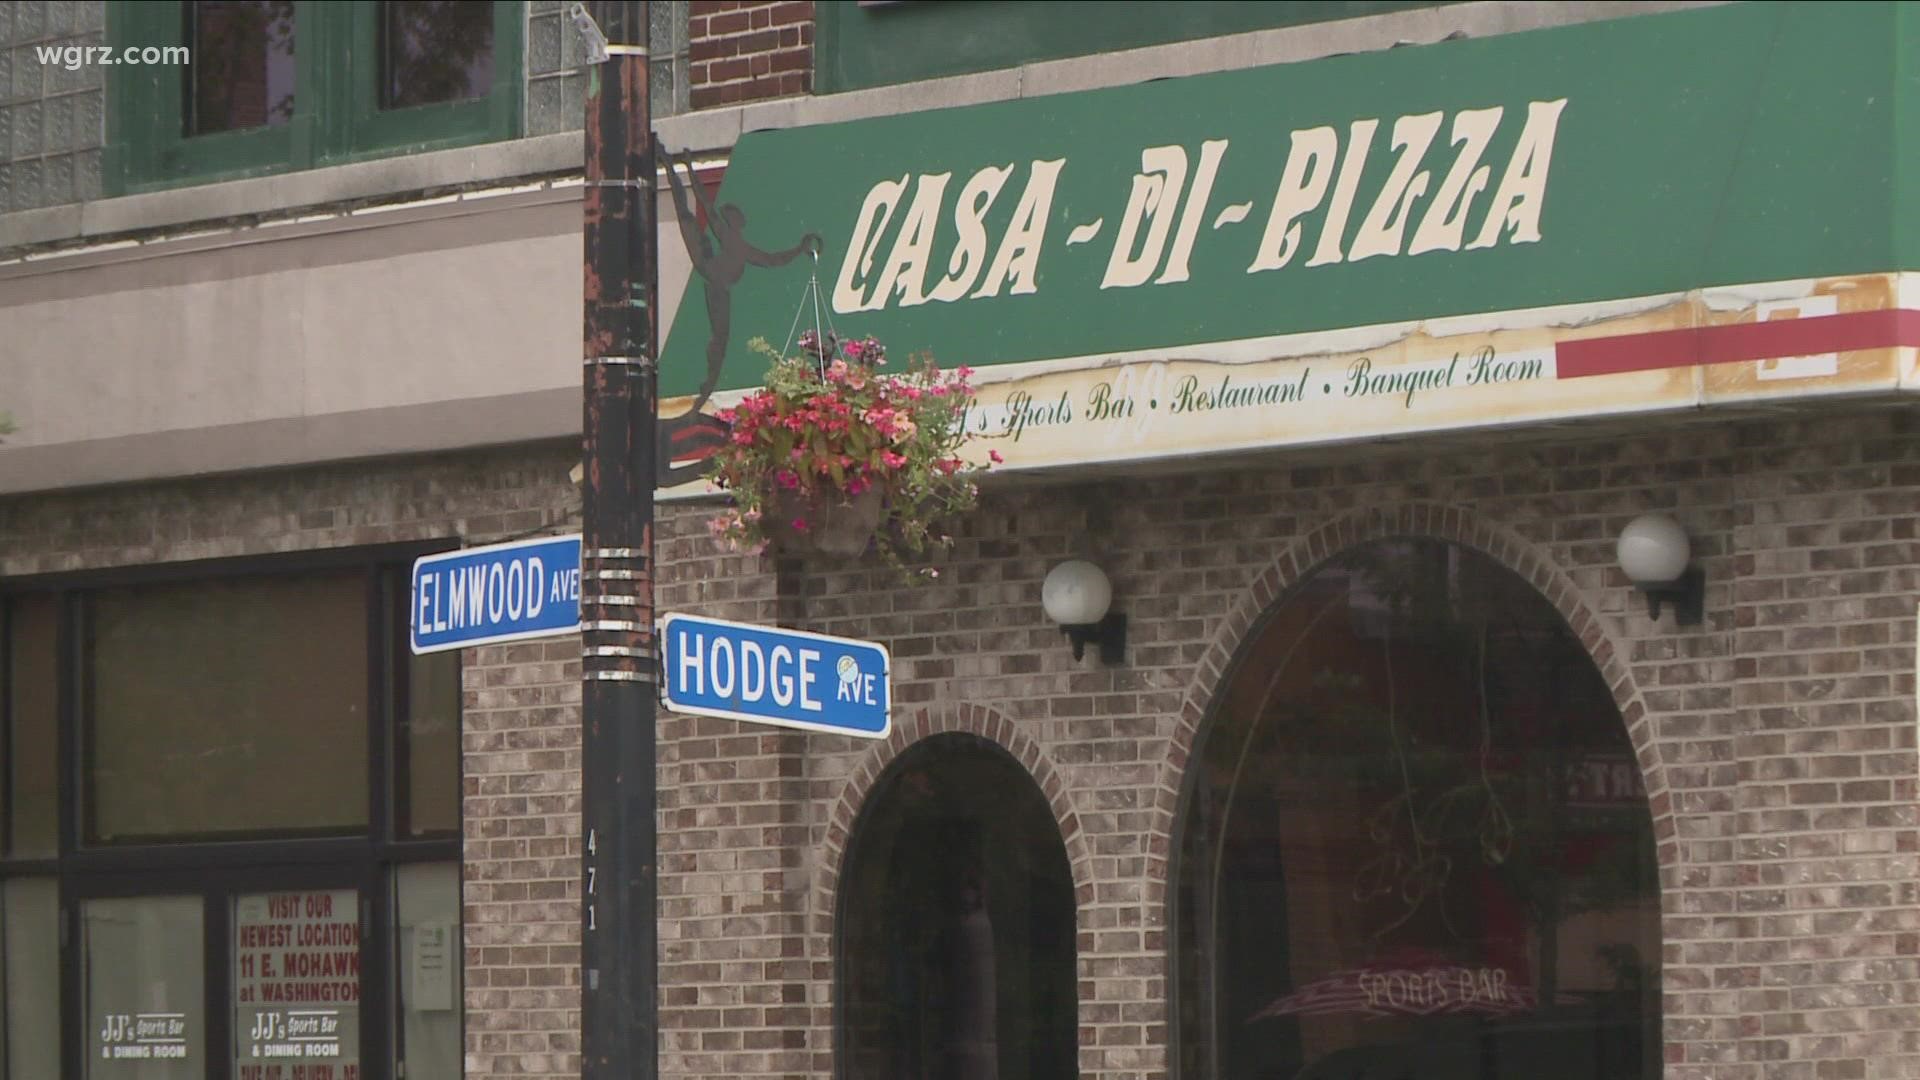 Sinatra said he will renovate the second story of the former Casa di Pizza building at 477 Elmwood Ave. into four market-rate apartments.